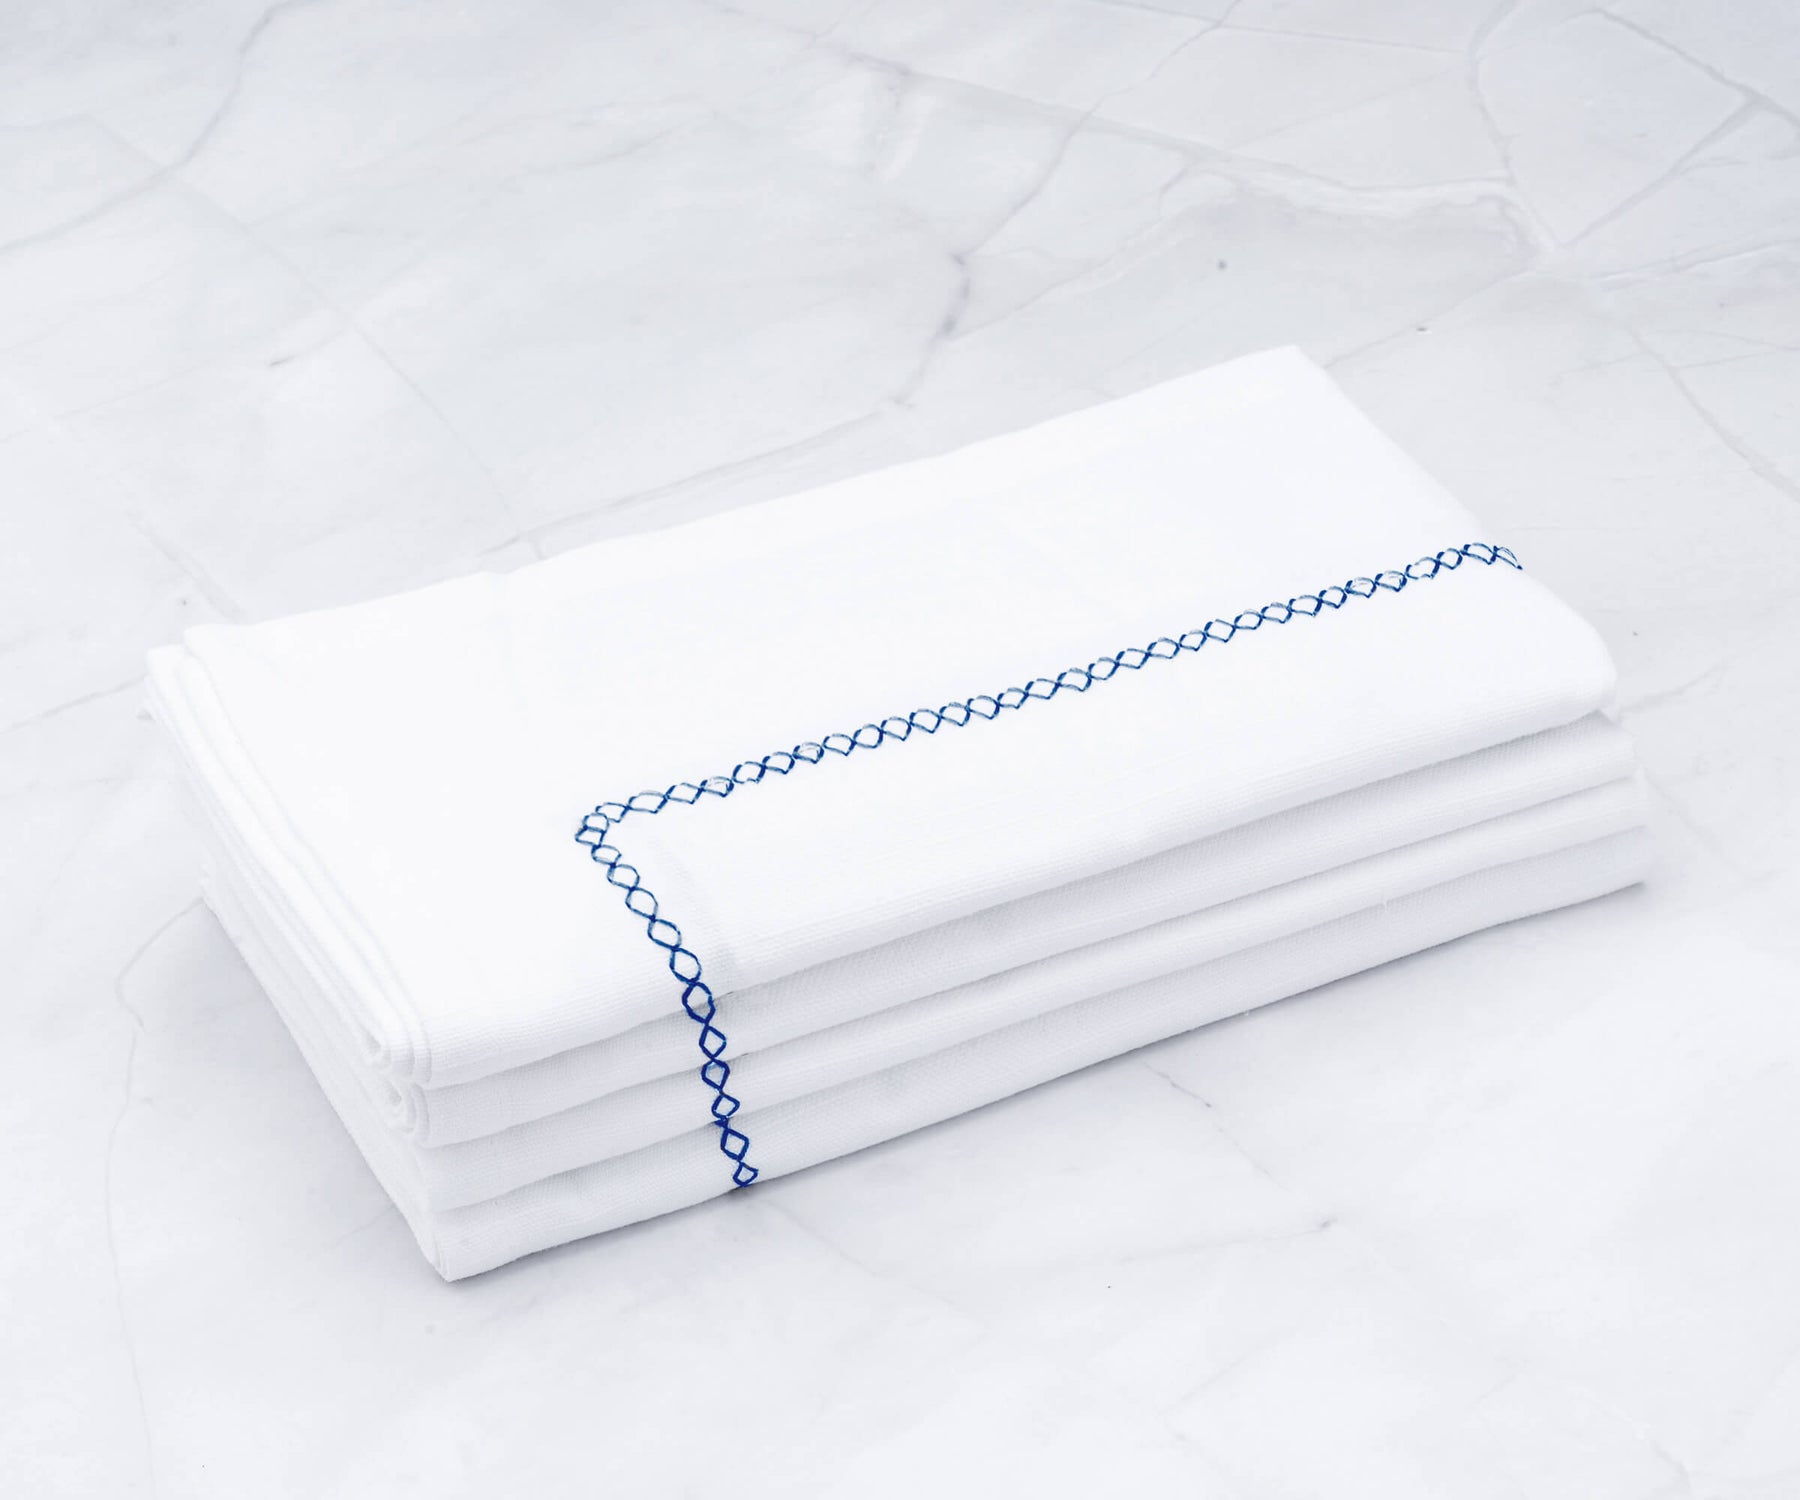 cloth napkins bulk or embroidery navy blue napkins are suitable for table setting. rectangle napkins